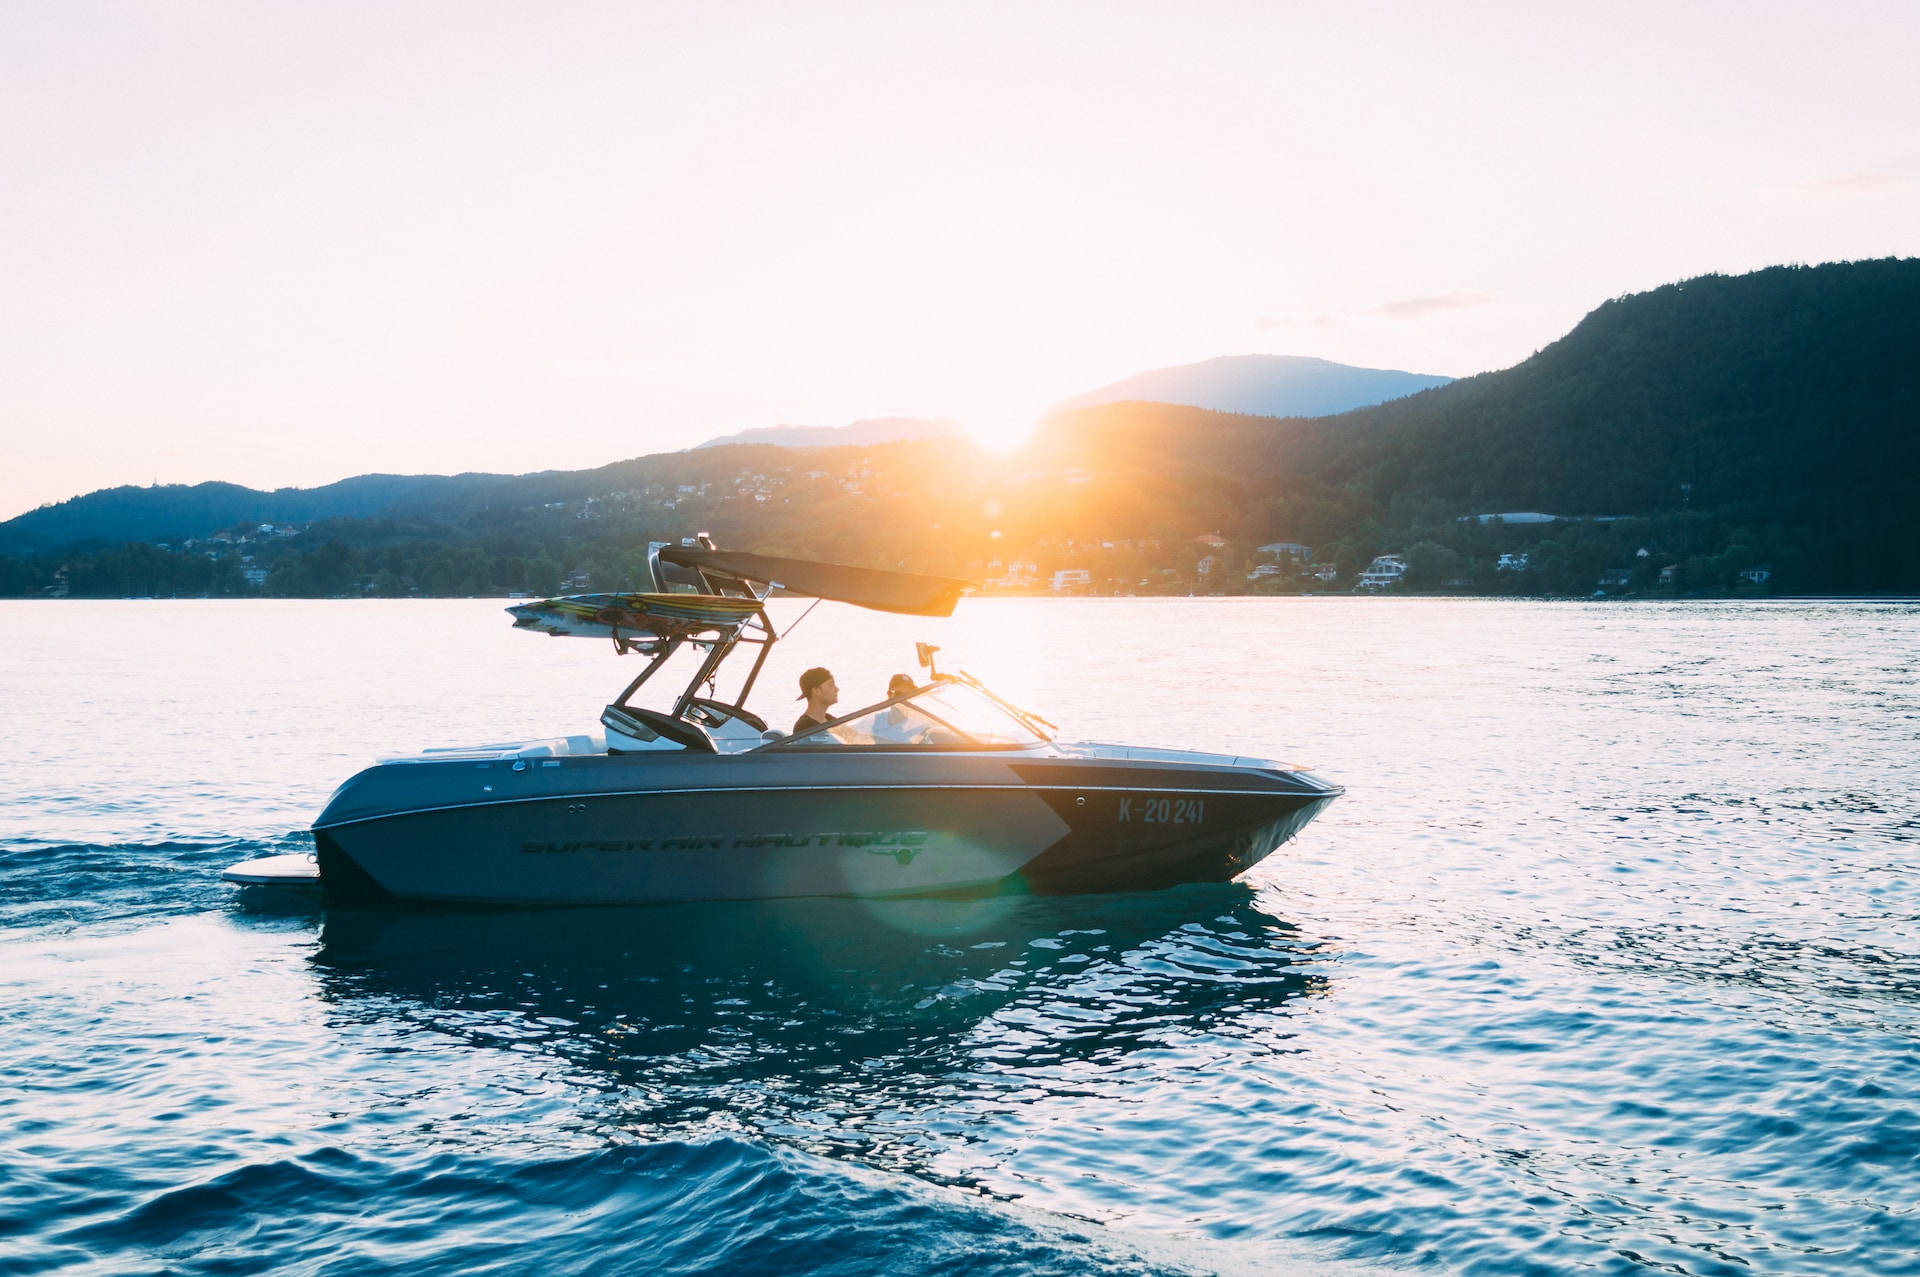 Prepare for an Unforgettable Open Water Trip with Simple Boat Rentals